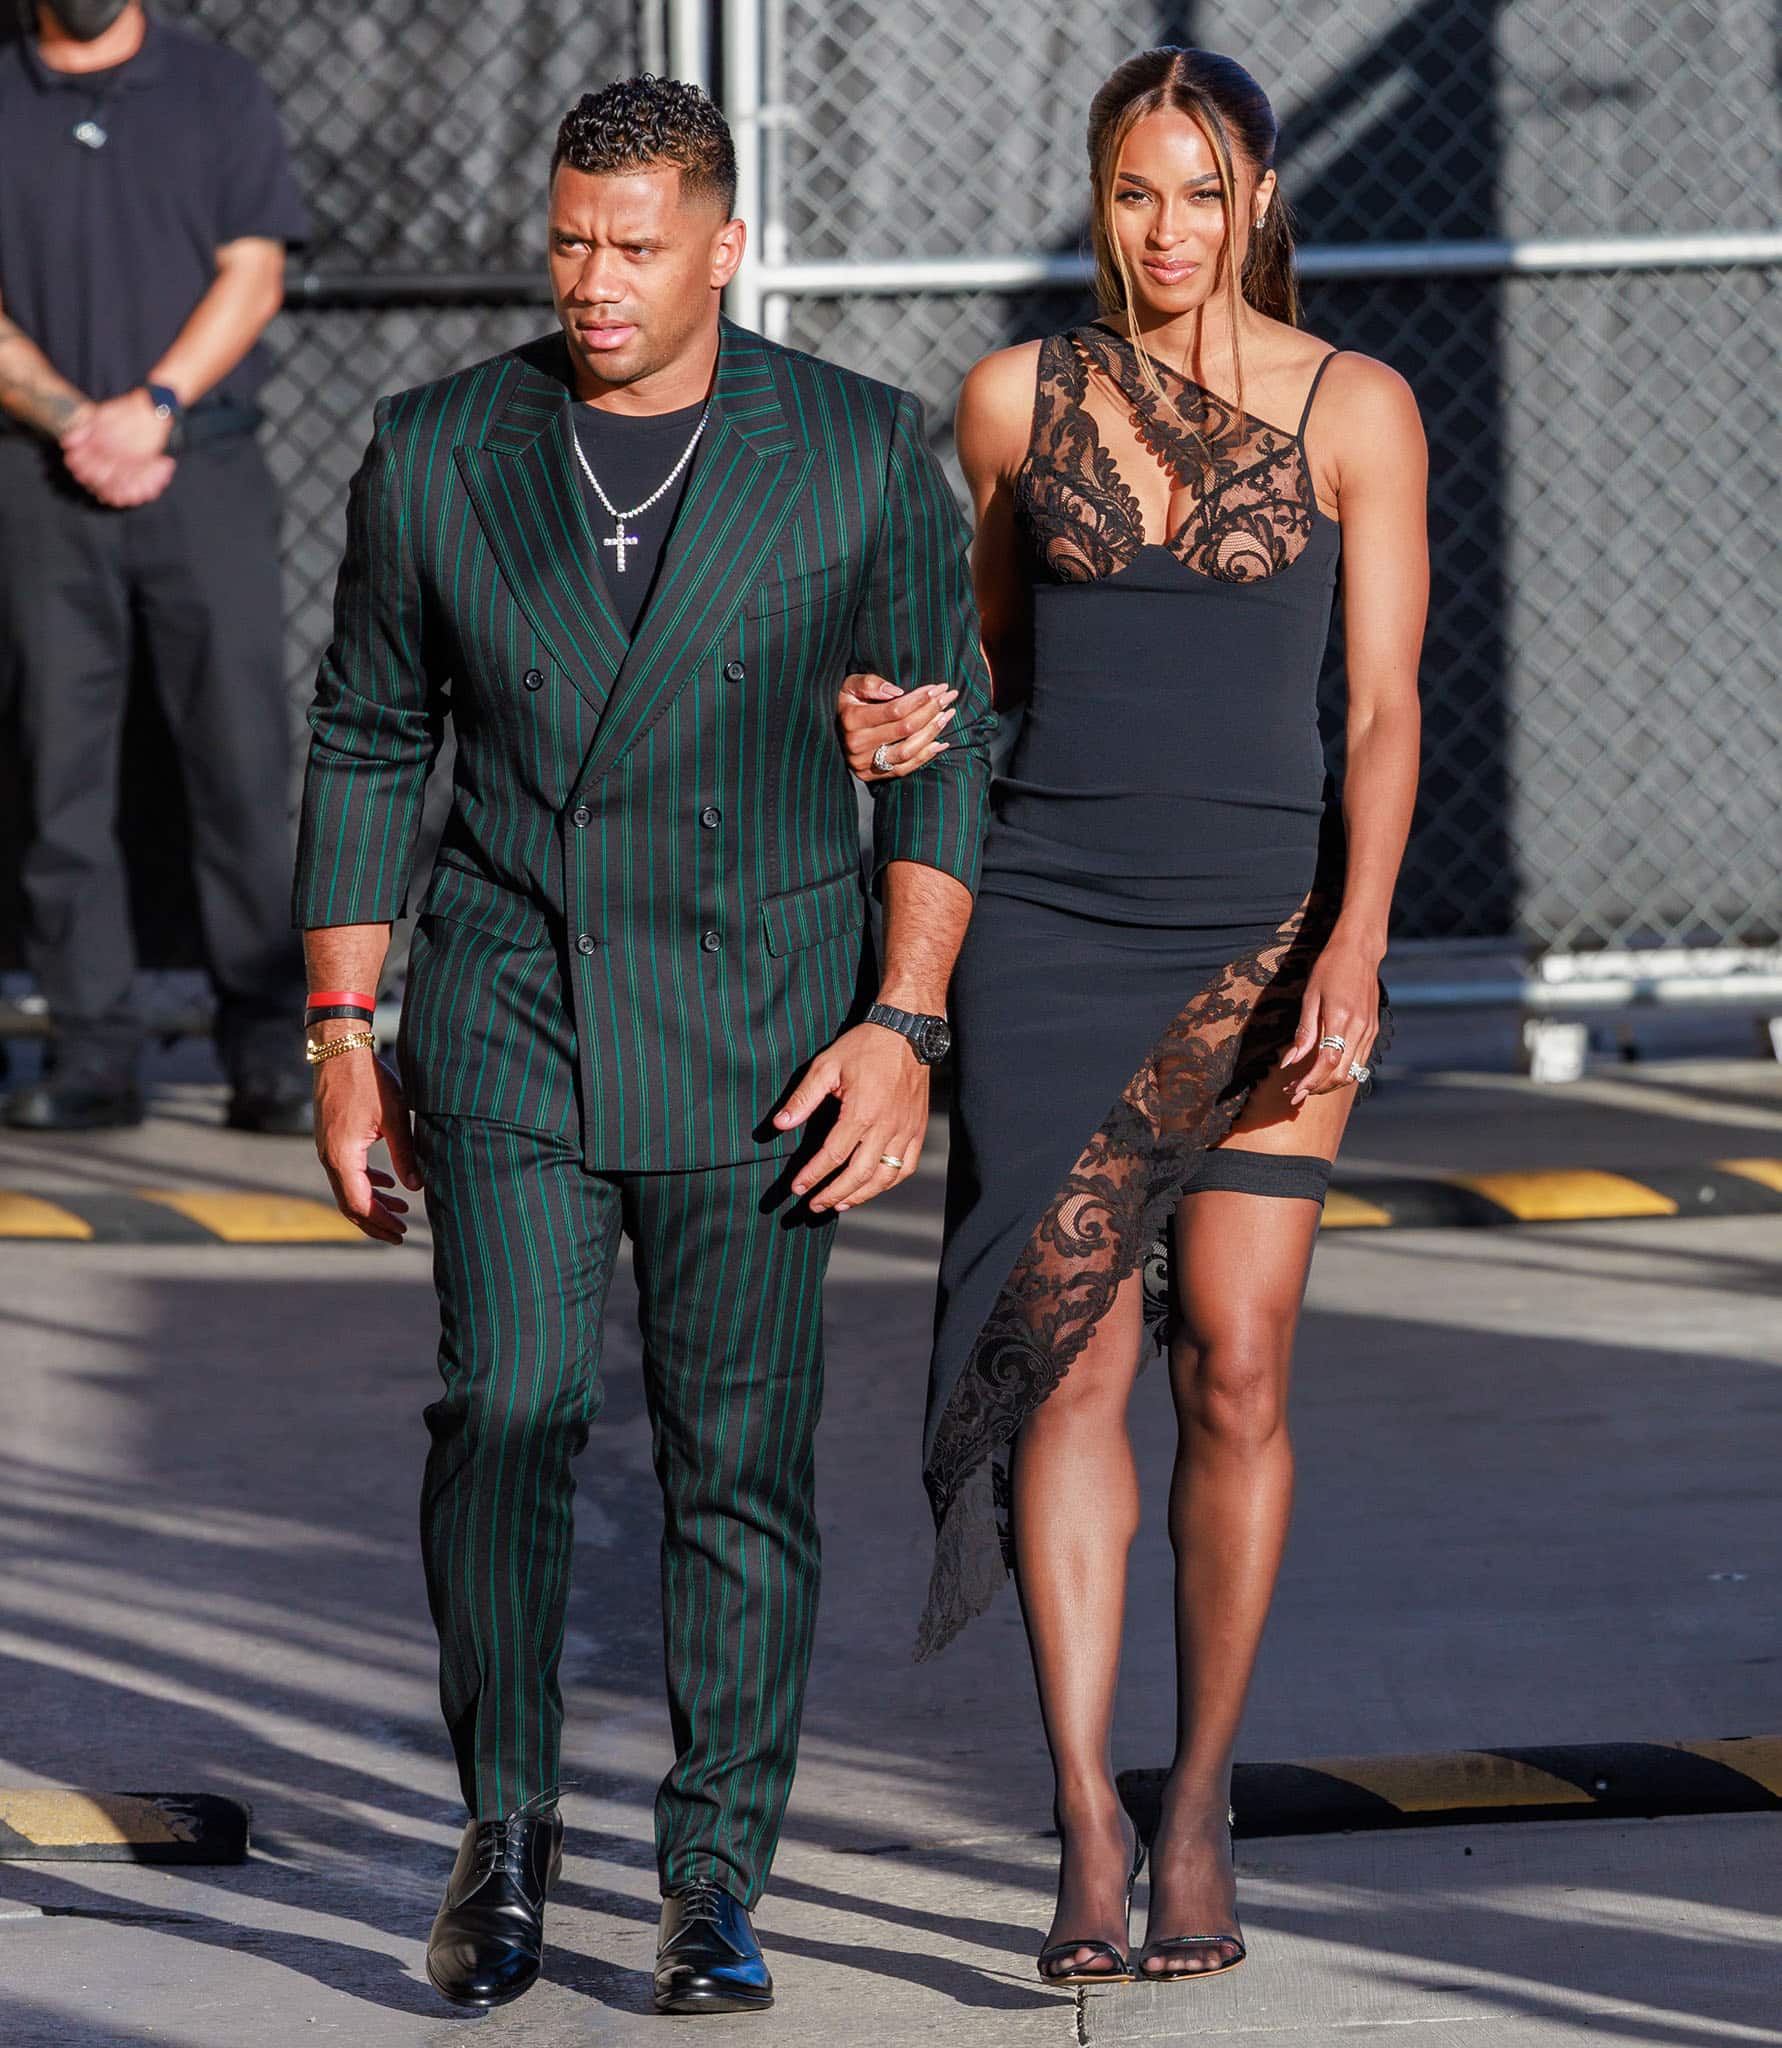 Ciara bares her legs and cleavage in David Koma Resort 2022 black lace dress